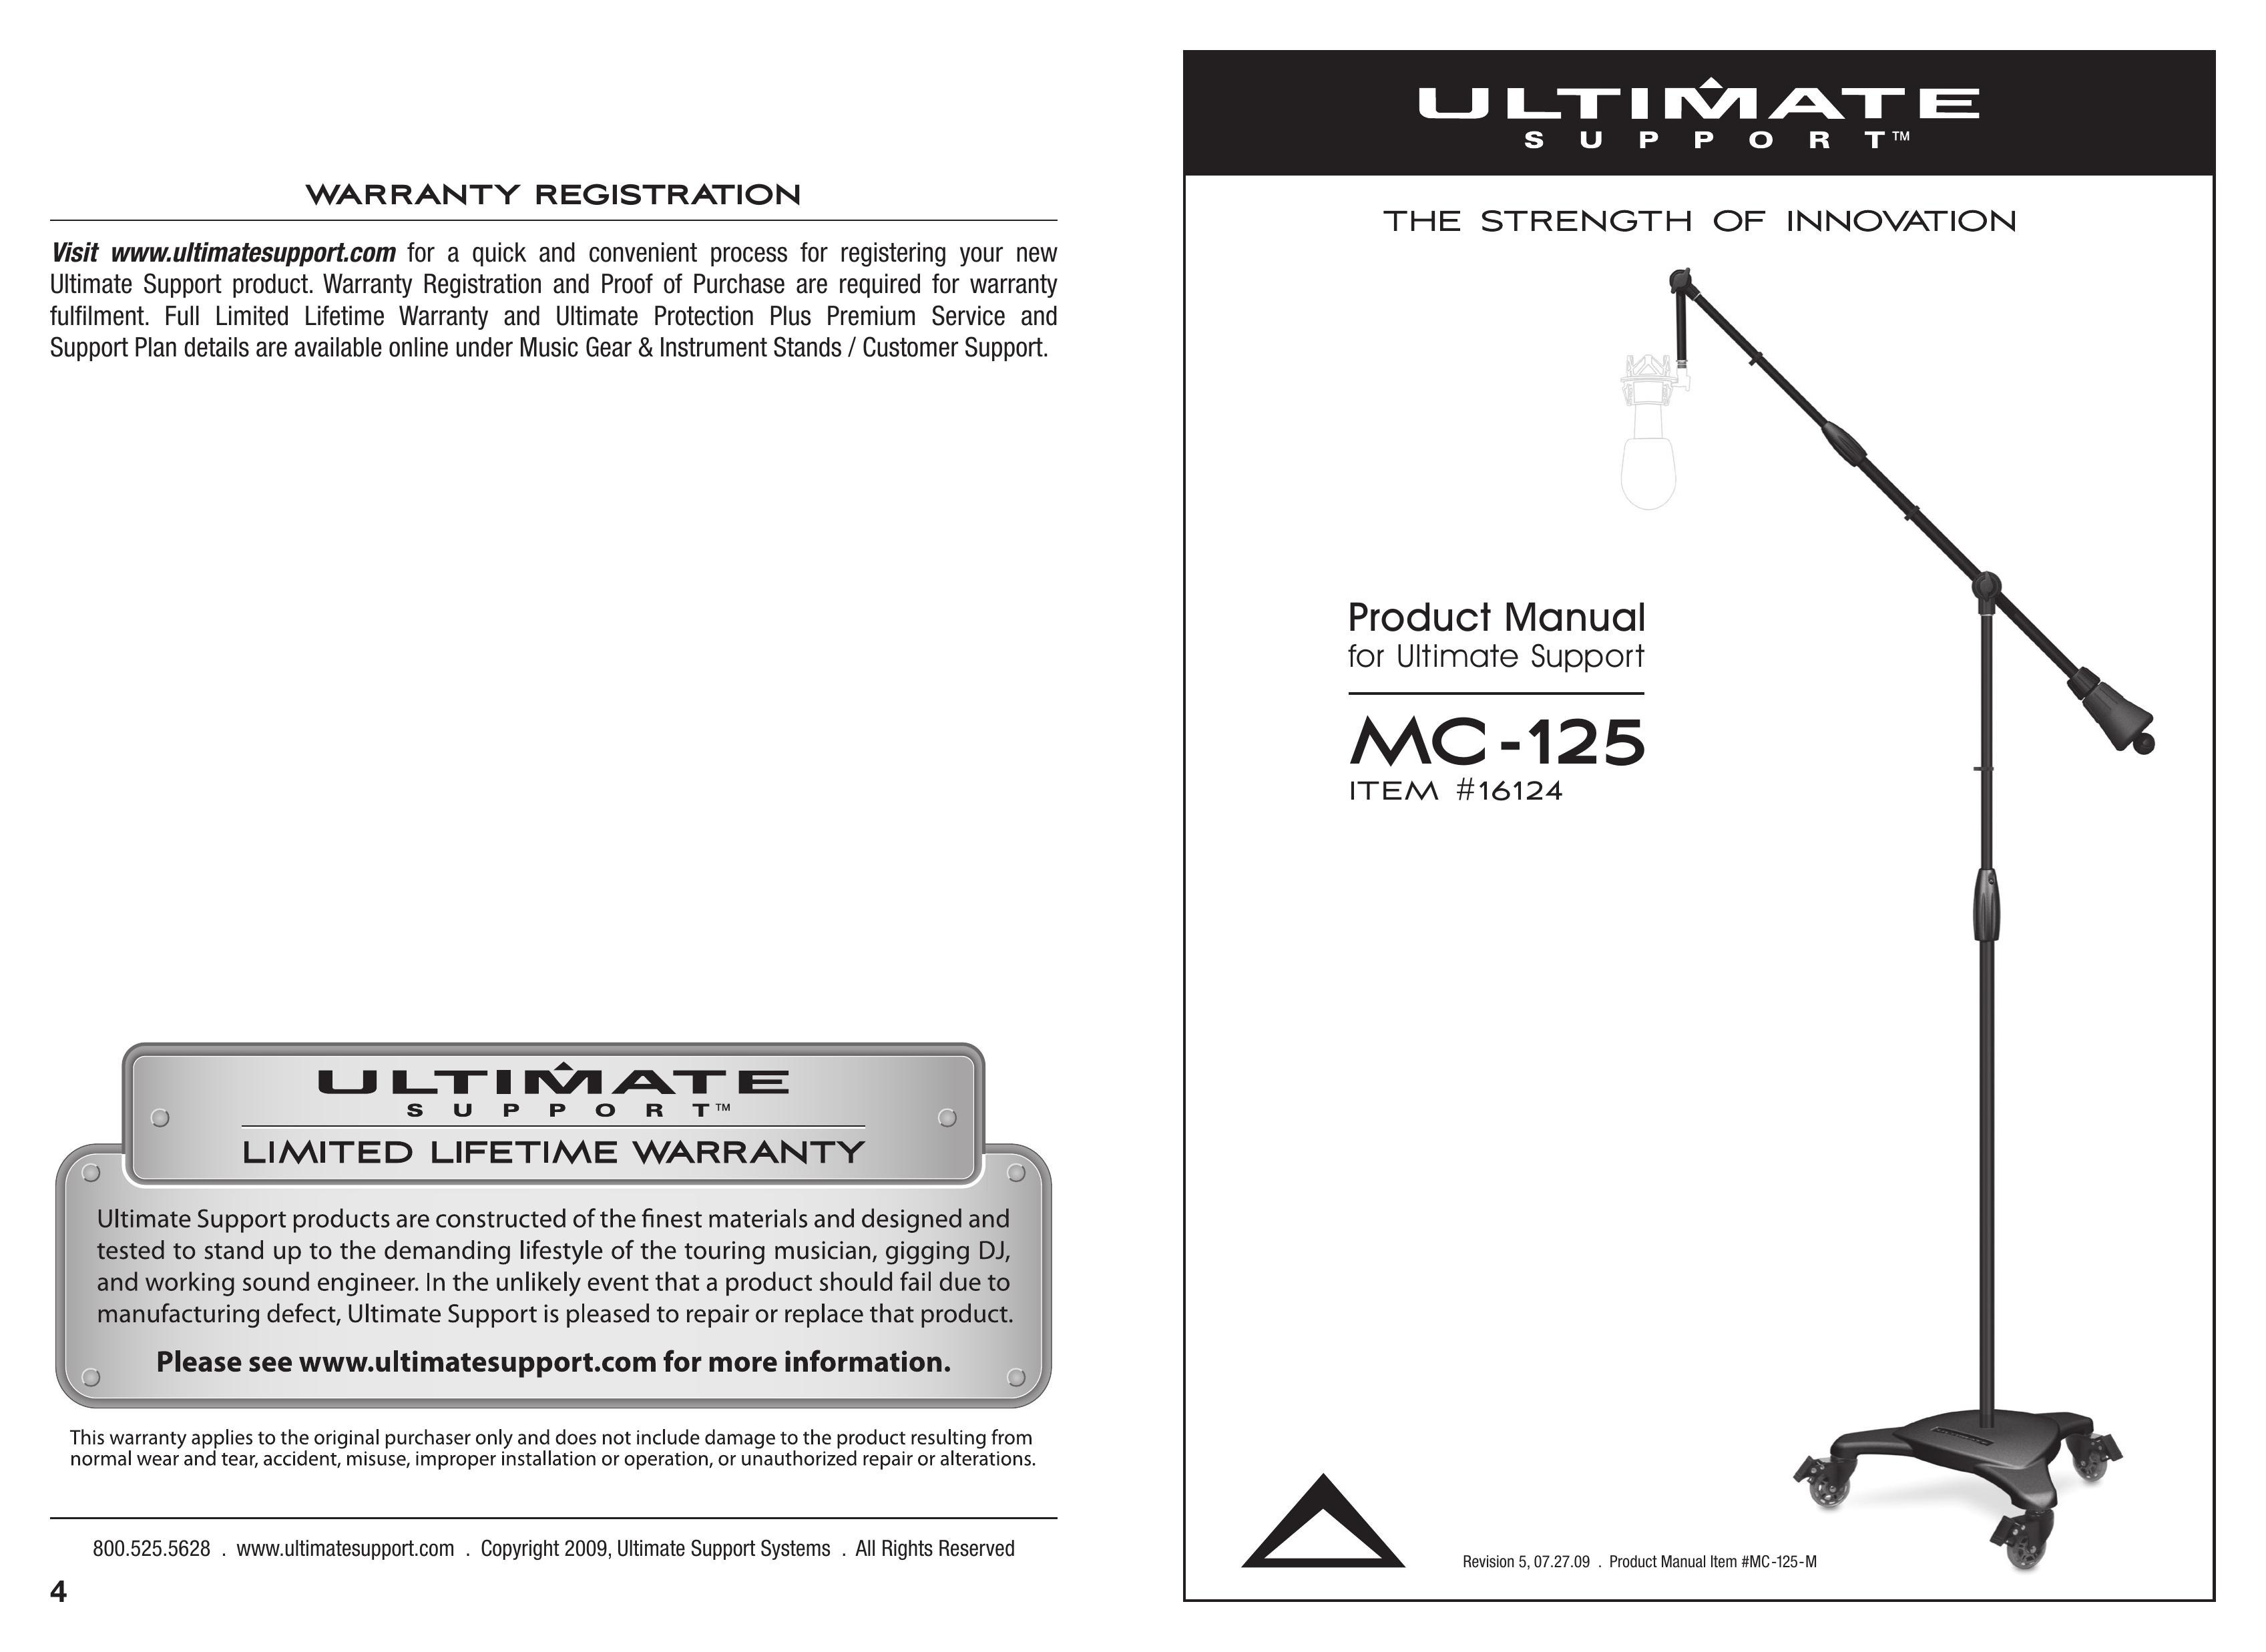 Ultimate Support Systems MC-125 Microphone User Manual